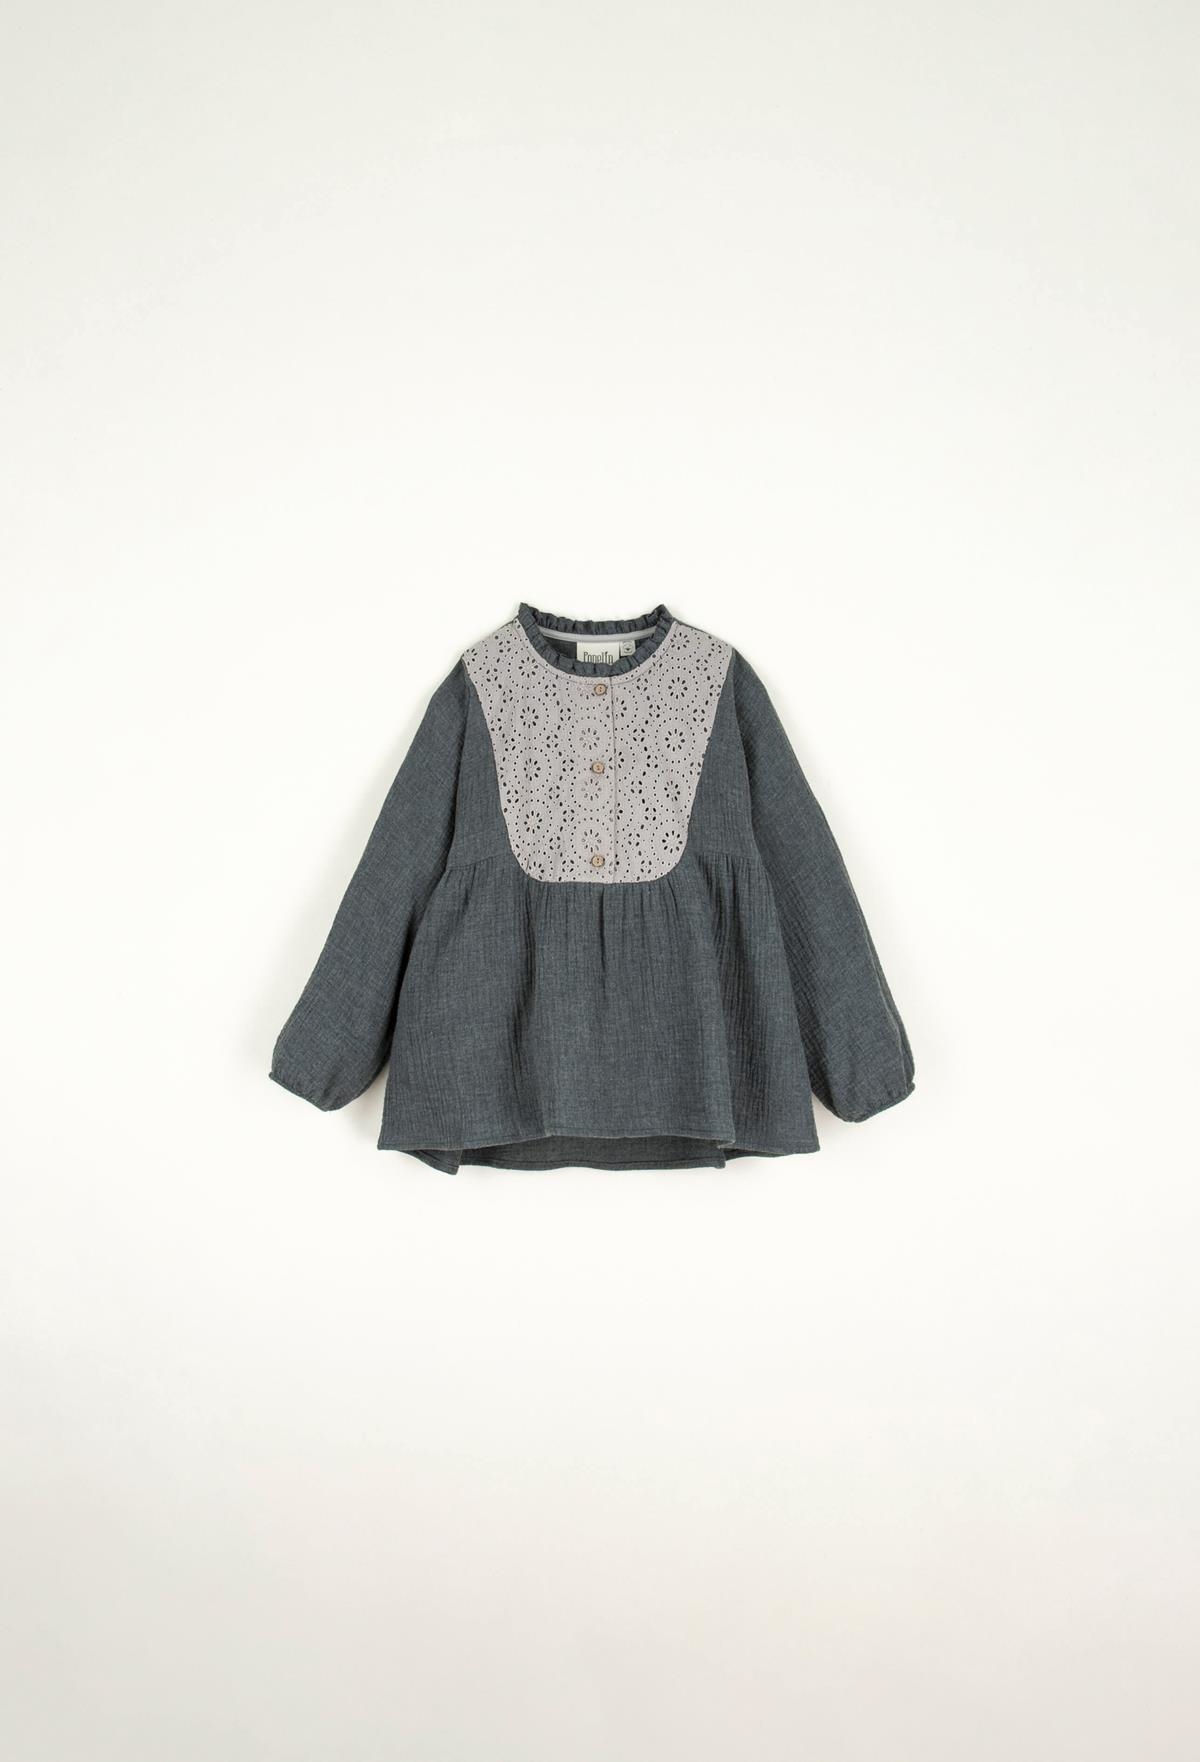 Mod.14.2 Dark grey blouse with yoke and Swiss embroidery | AW22.23 Mod.14.2 Dark grey blouse with yoke and Swiss embroidery